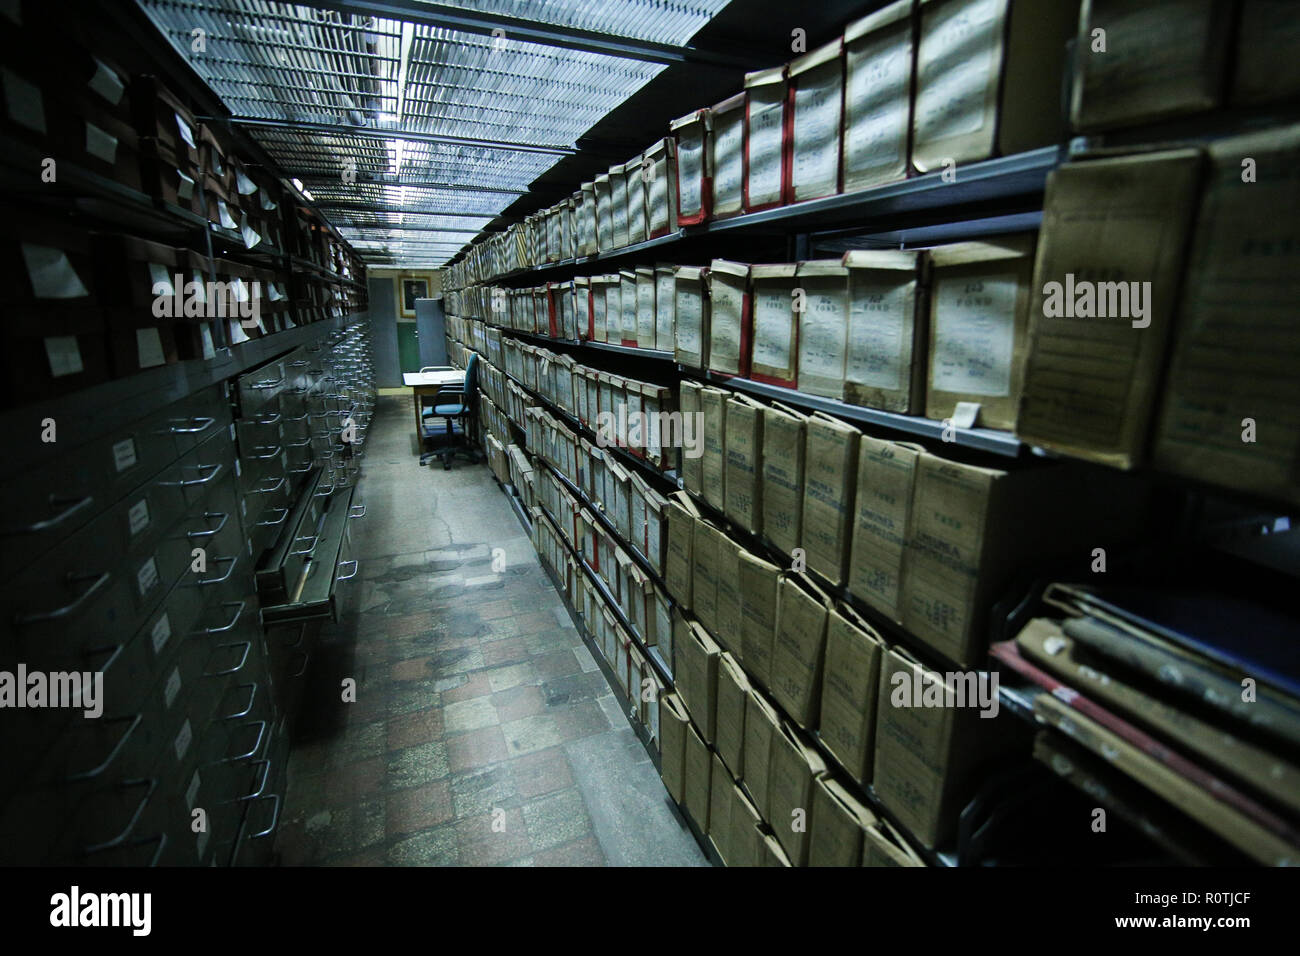 BUCHAREST, ROMANIA - October 31, 2018: Historical archives stacked in a deposit of Romanian National Archives headquarters Stock Photo